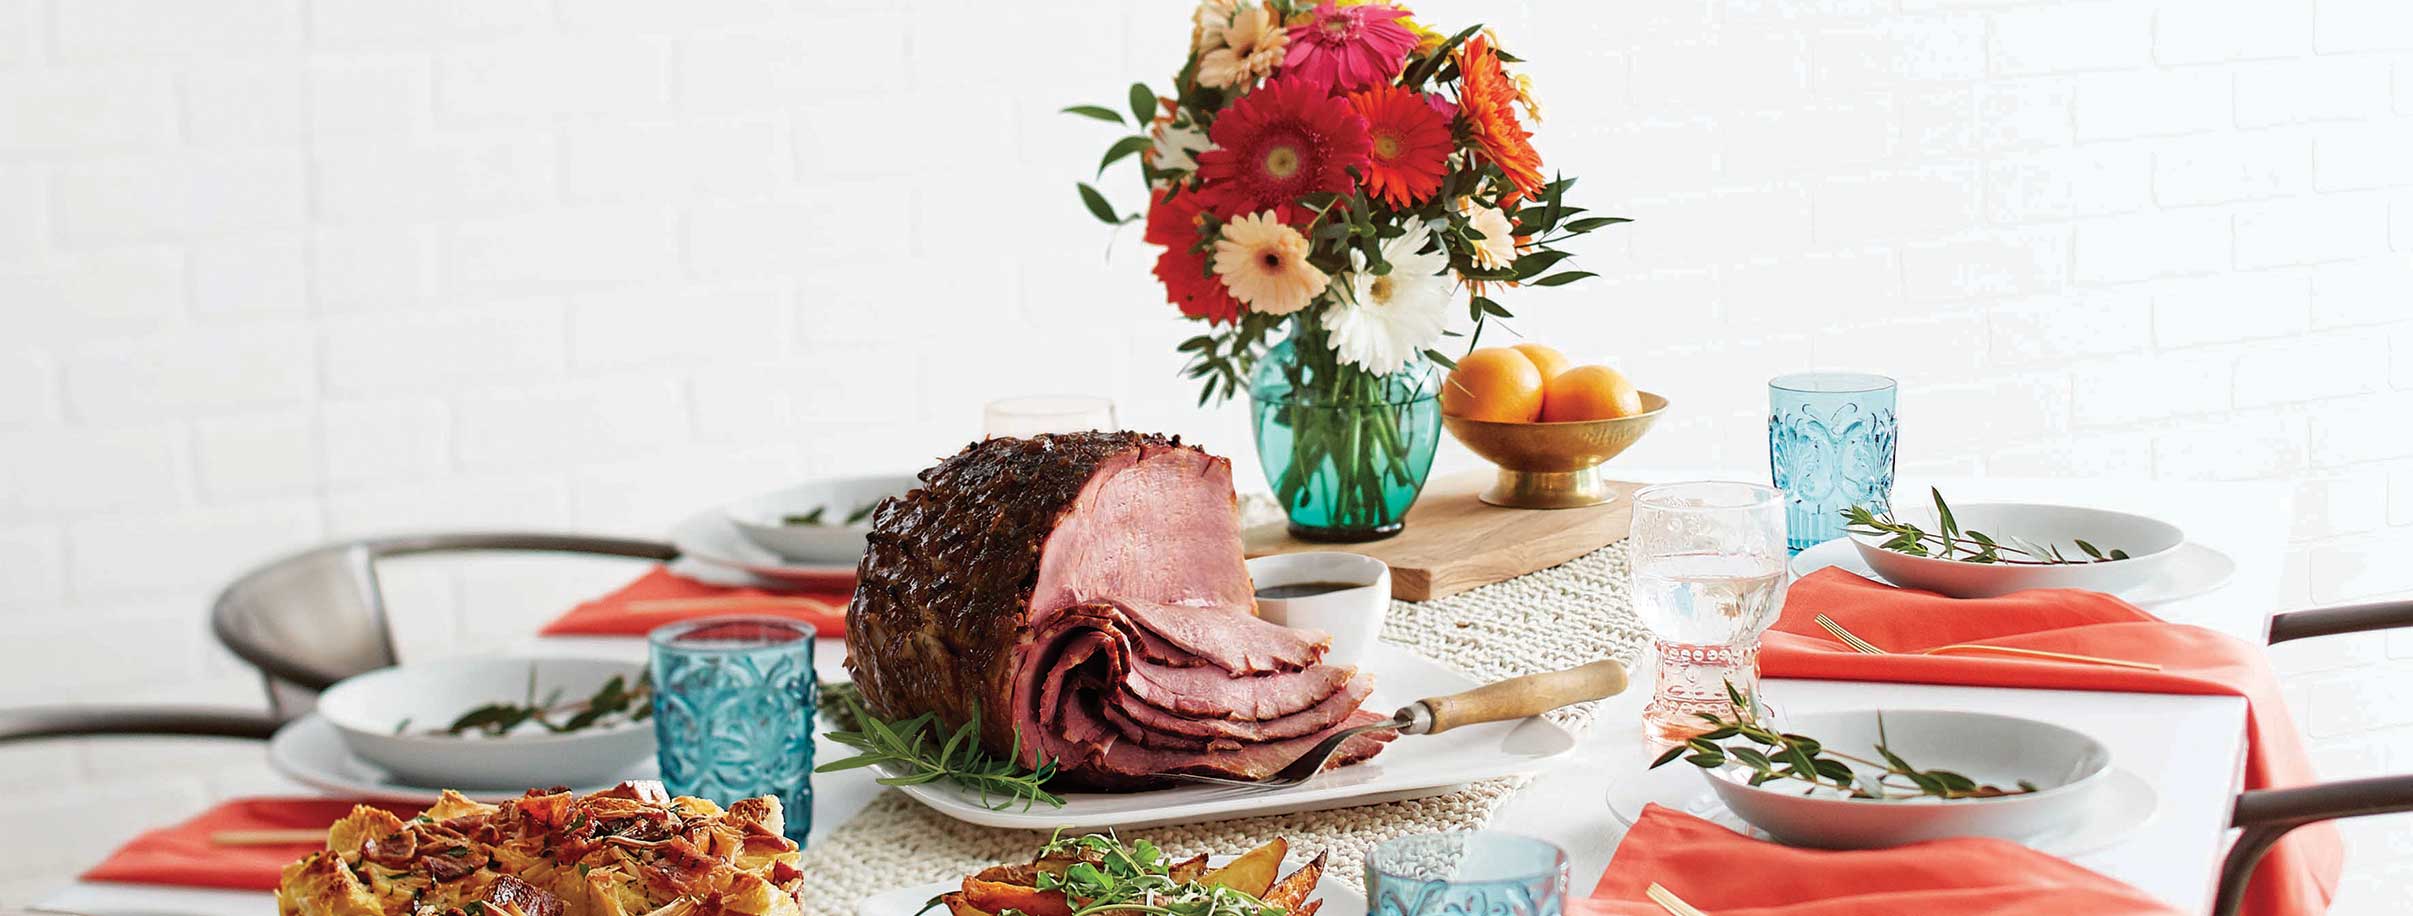 Where To Order Easter Dinners For 18 Or Less Per Person The Krazy Coupon Lady